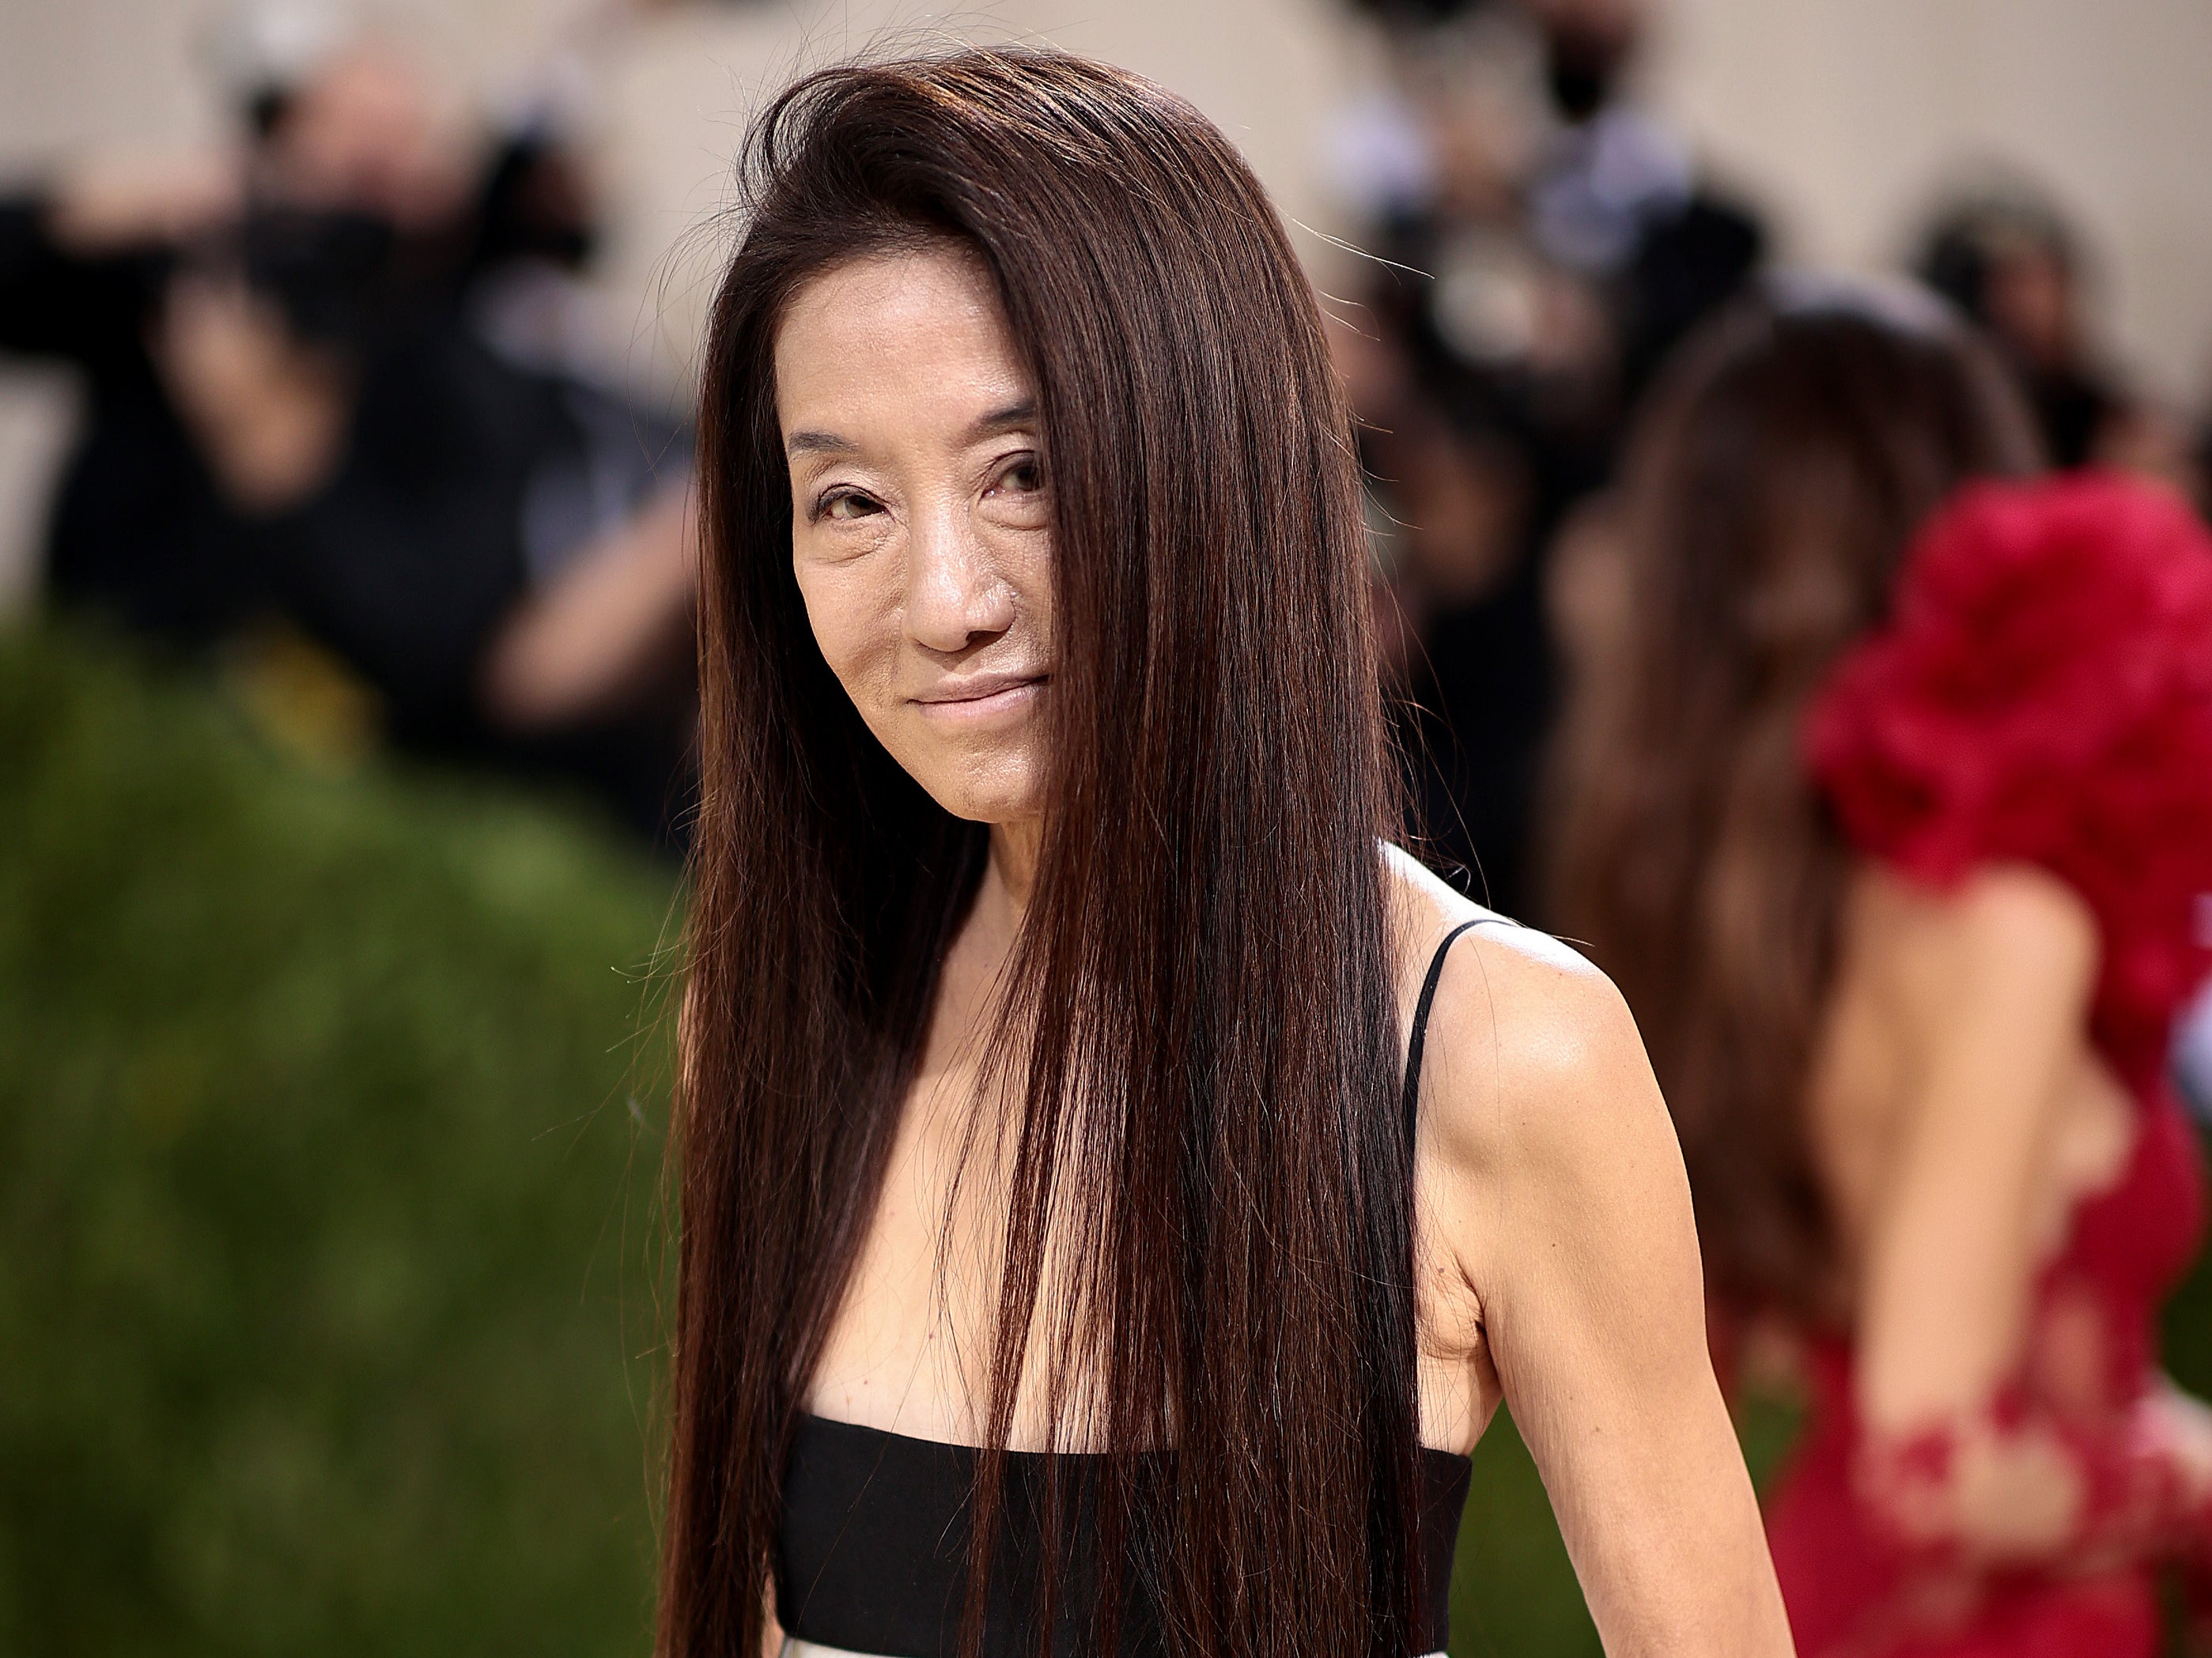 Vera Wang was 'totally shocked' her sports bra photo went viral